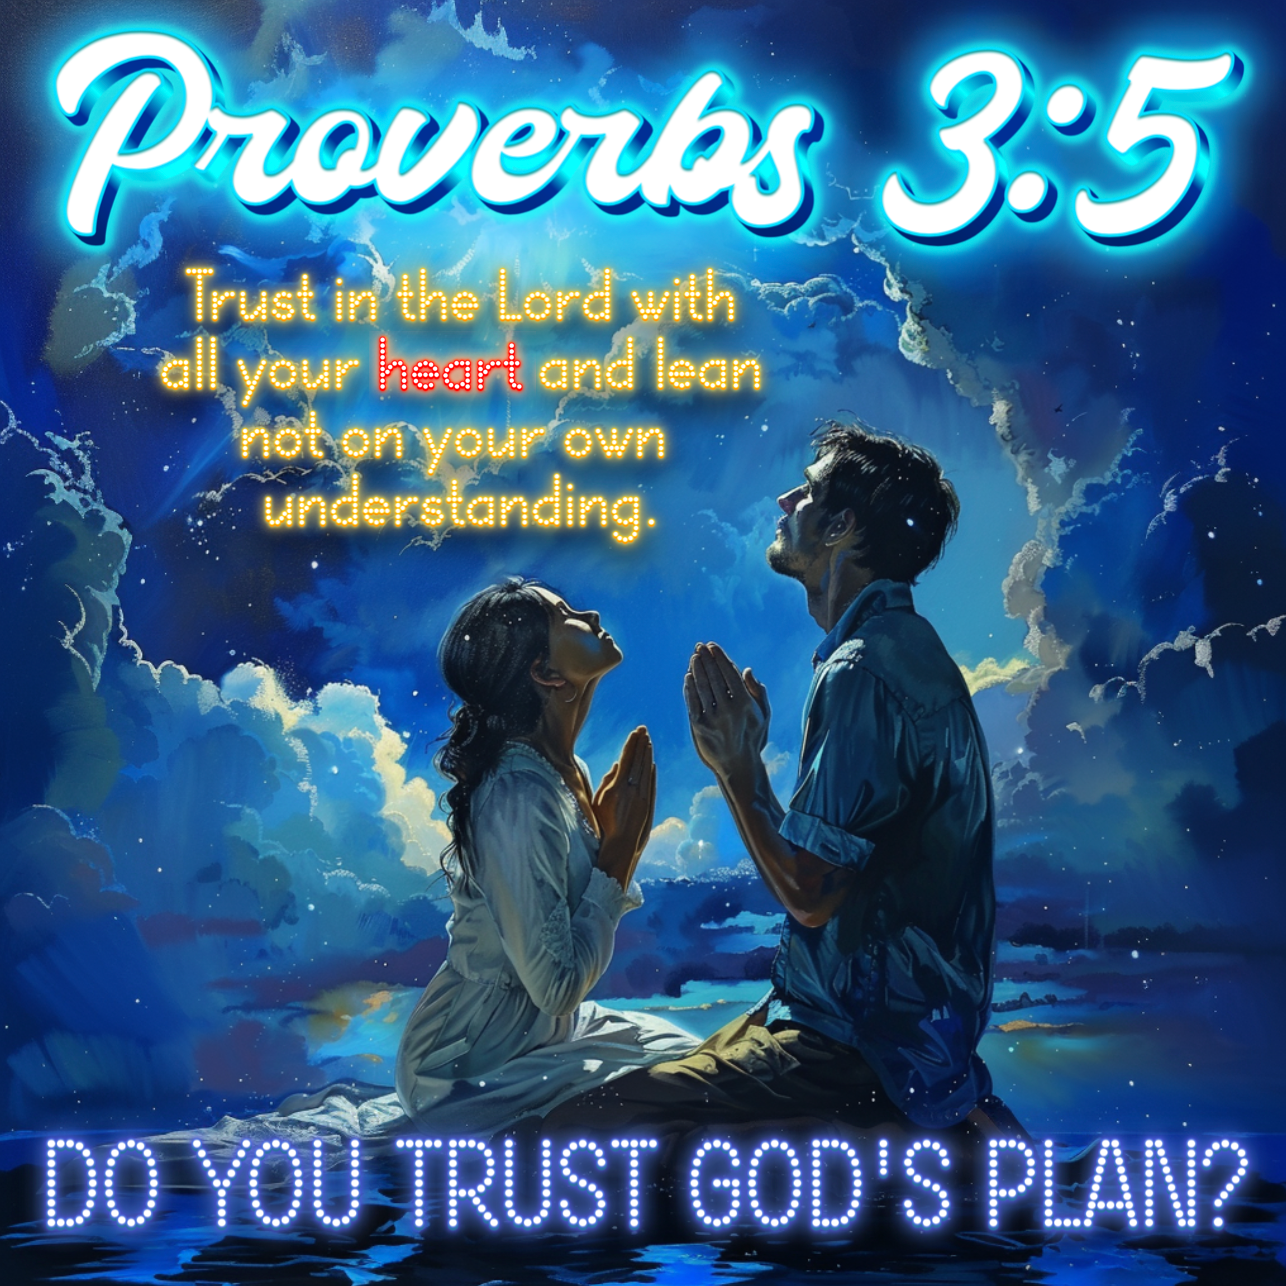 Proverbs 3:5 Bible Verse - Trust in the Lord with All your Heart